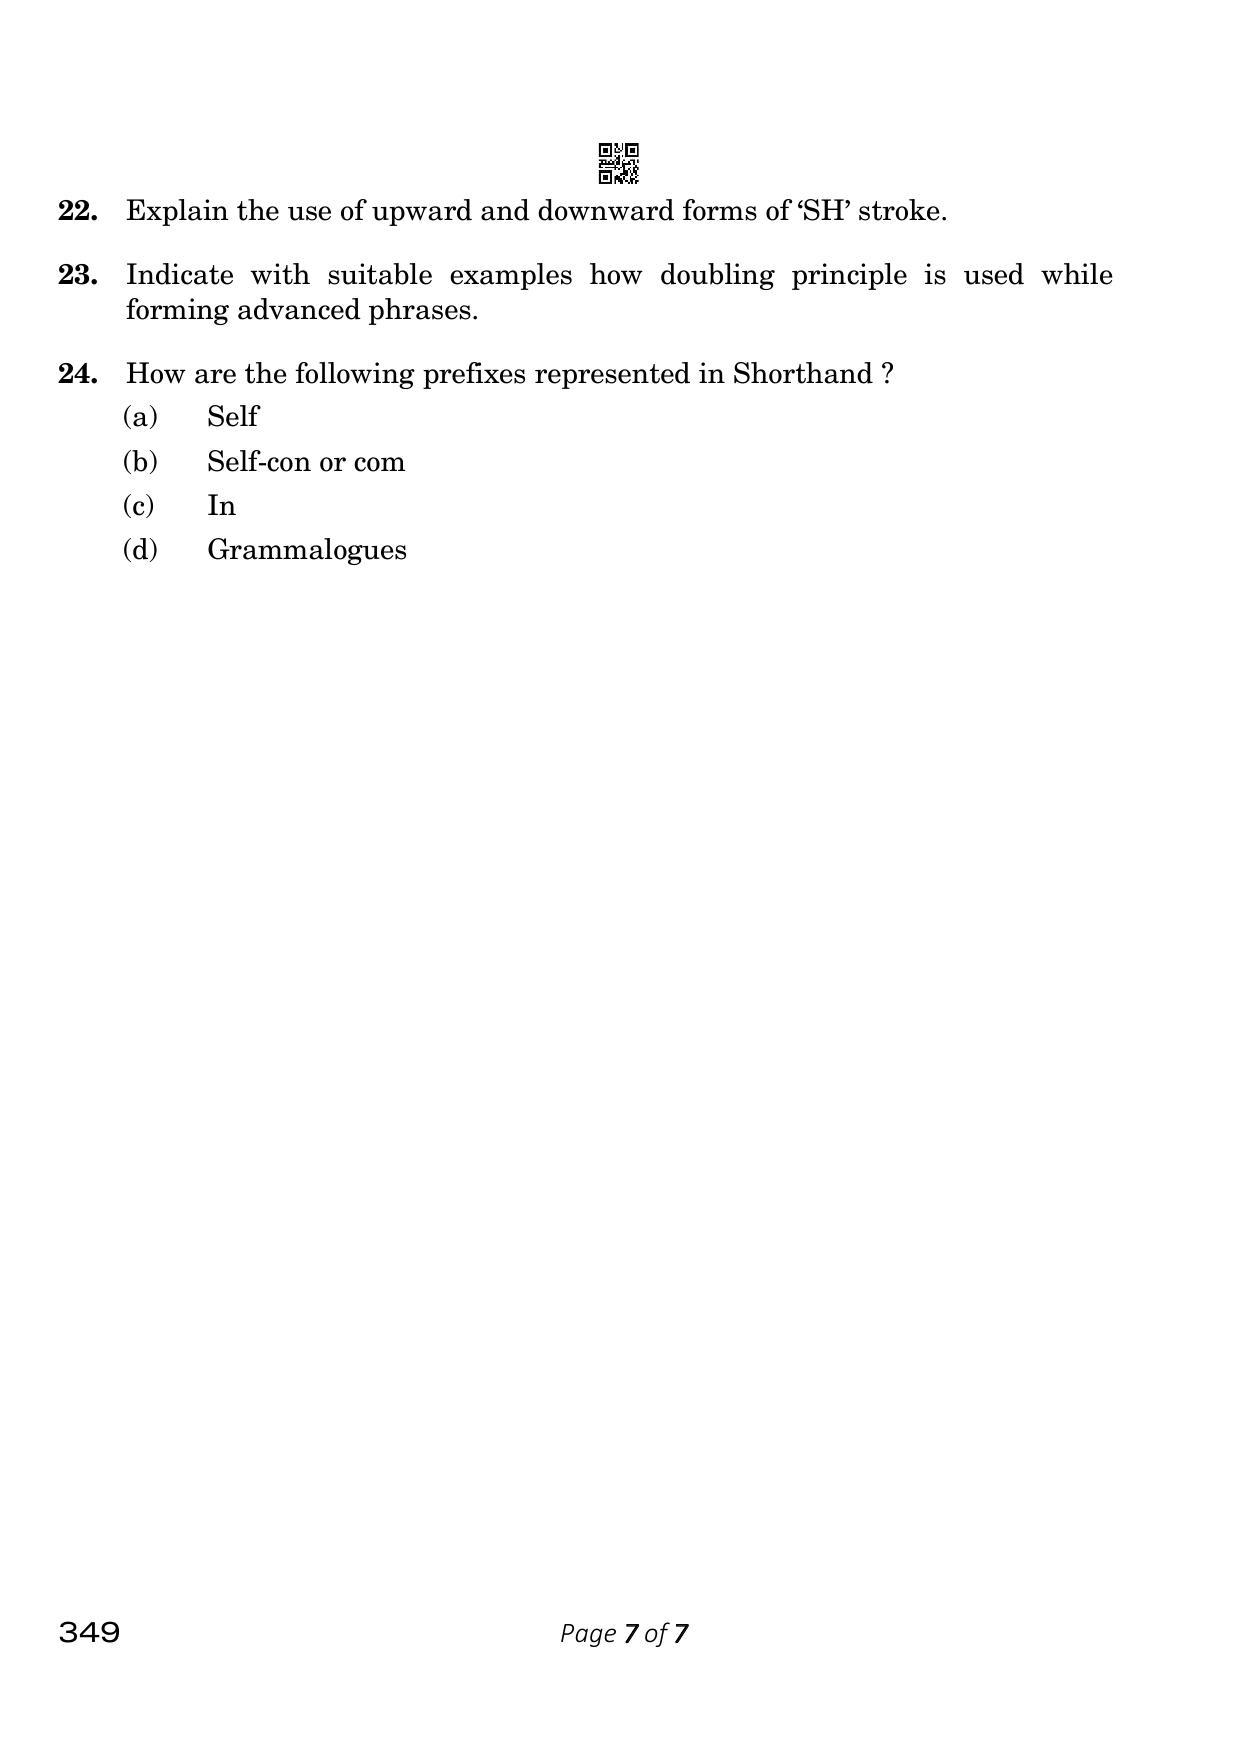 CBSE Class 12 349_Shorthand English 2023 Question Paper - Page 7